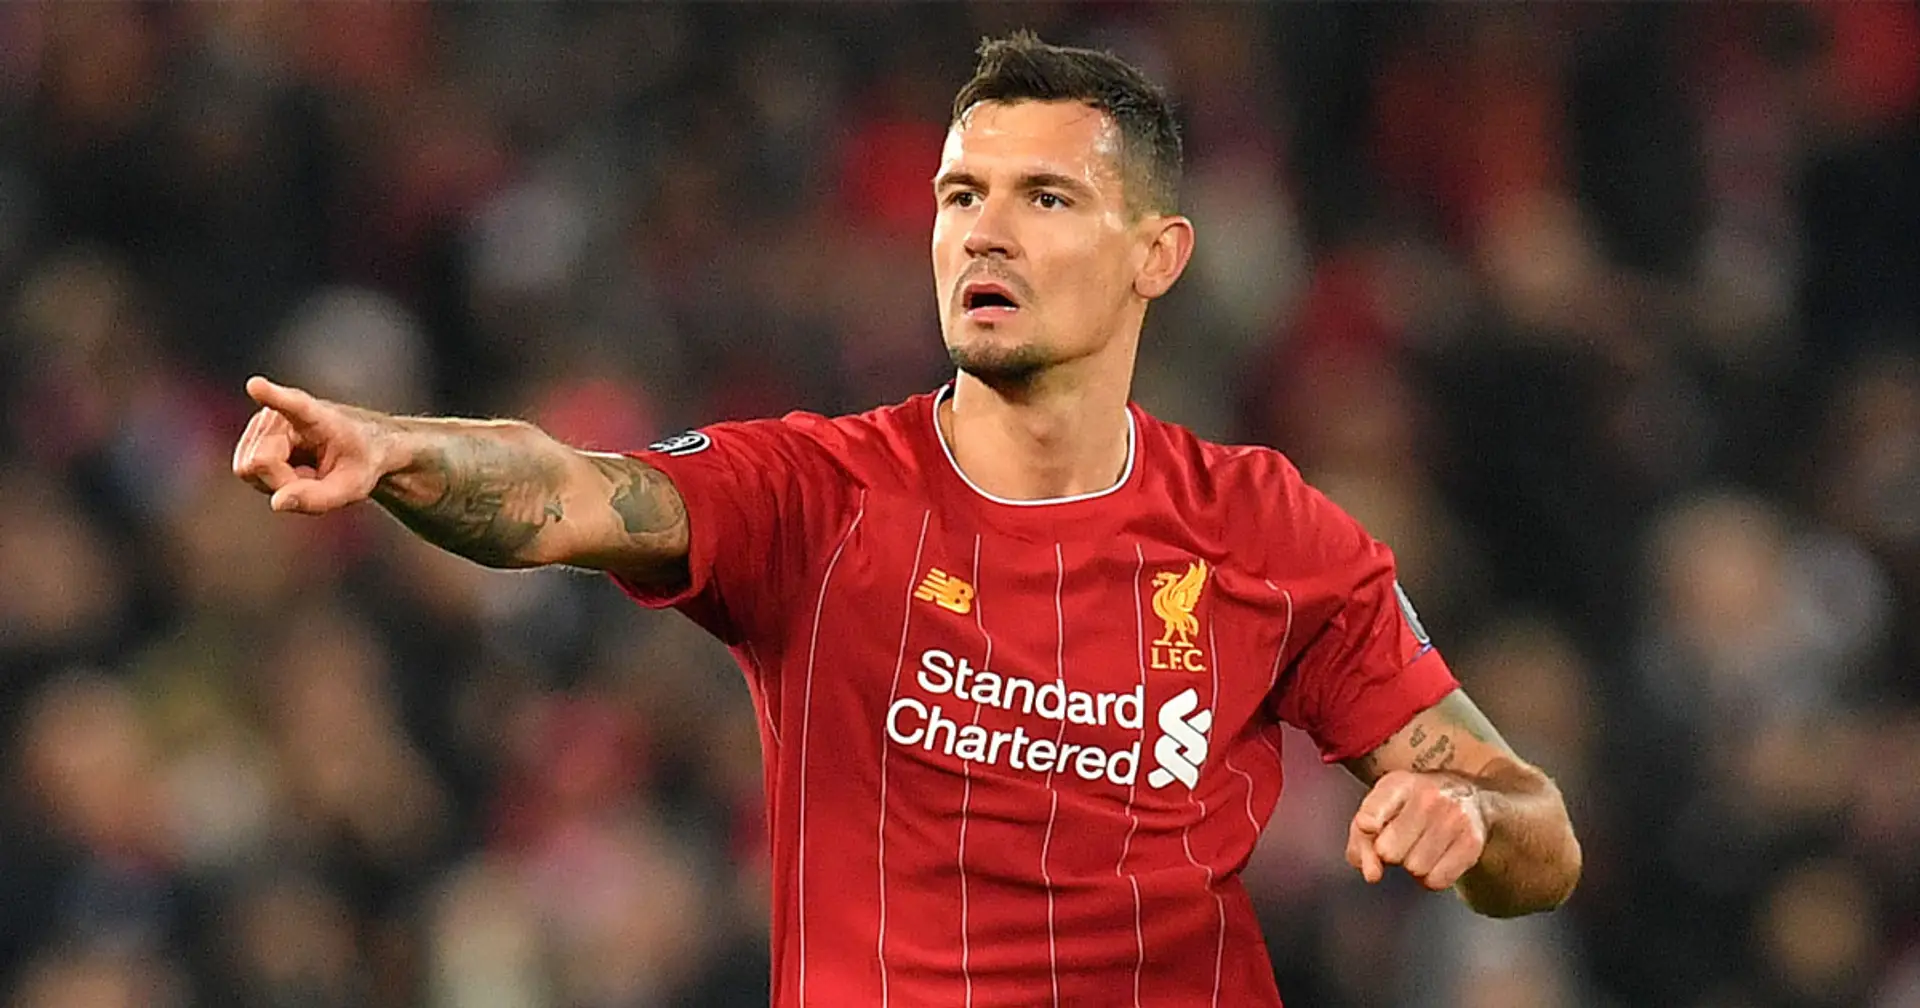 Liverpool determined to 'secure a fee' for Lovren amid reports claiming he might leave as free agent